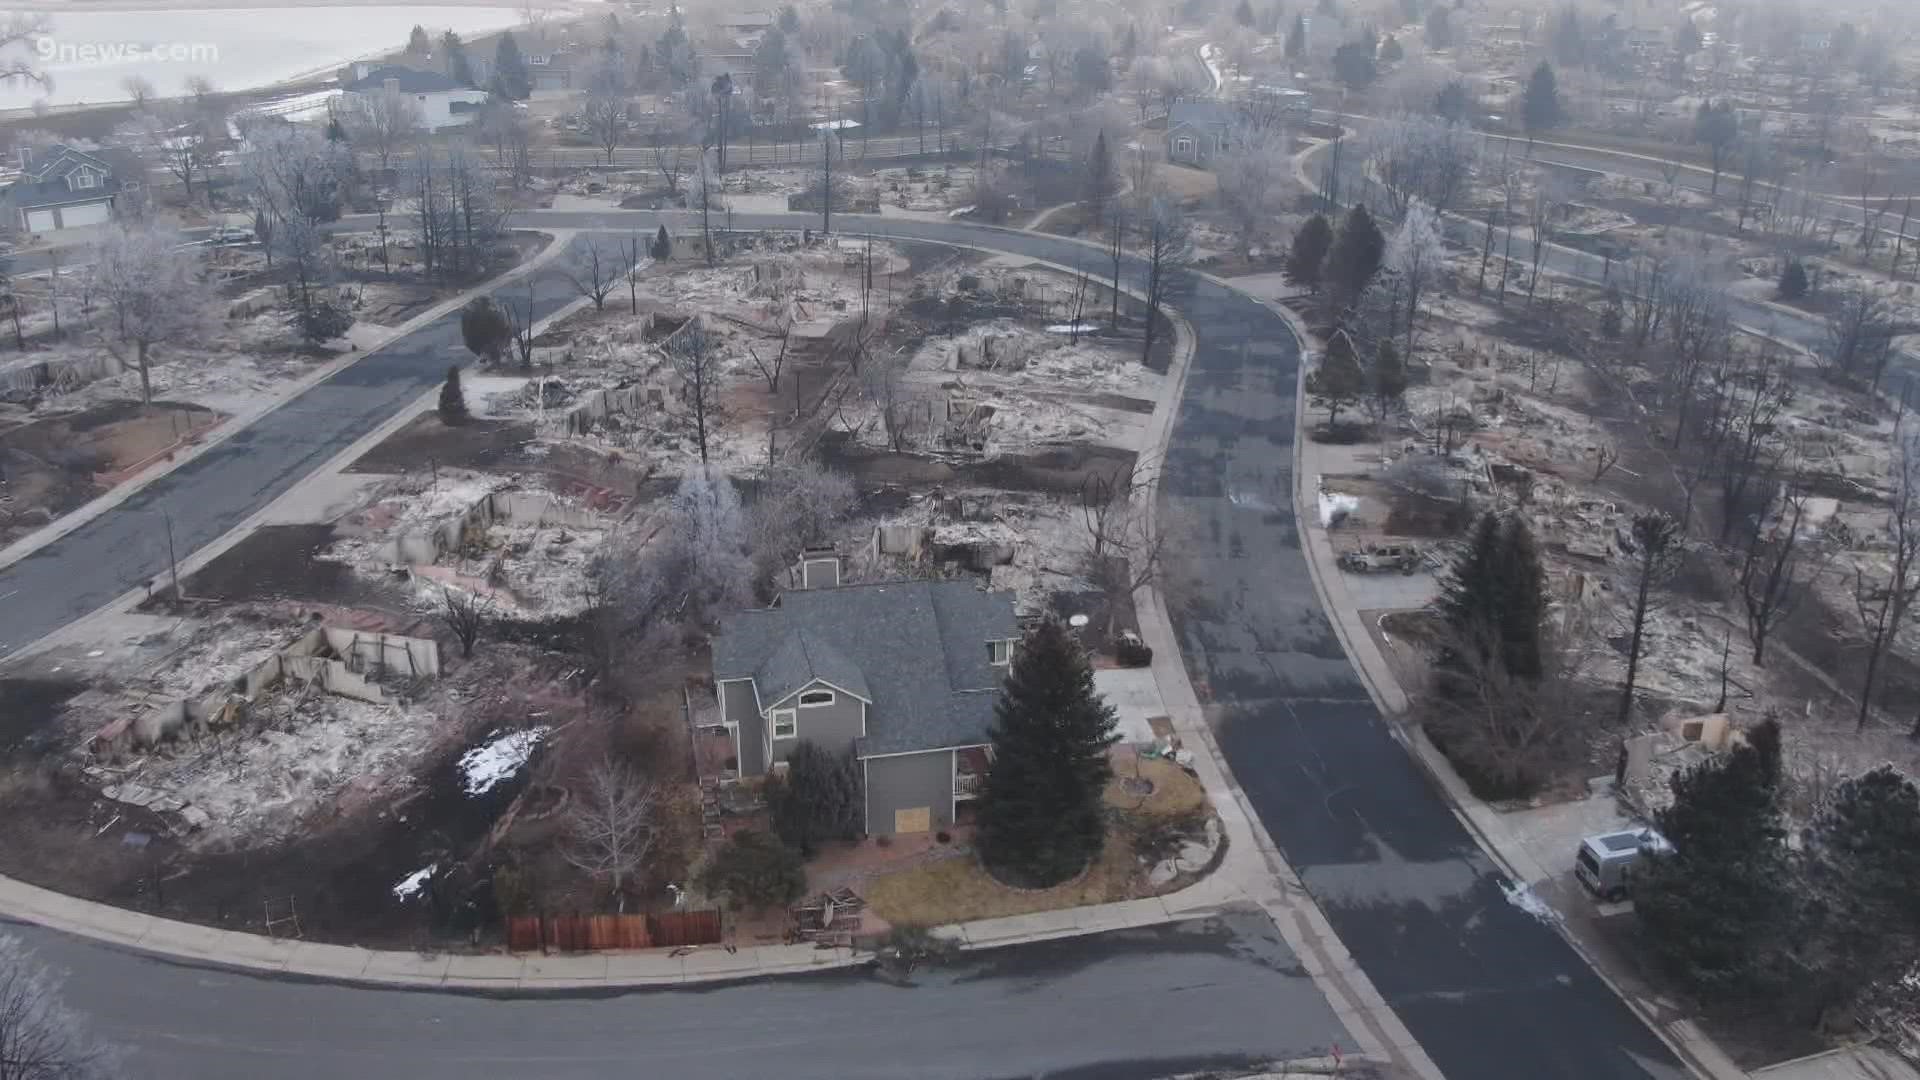 With more than 1,000 homes destroyed in the fire, the area's housing supply and demand problem has only gotten worse.